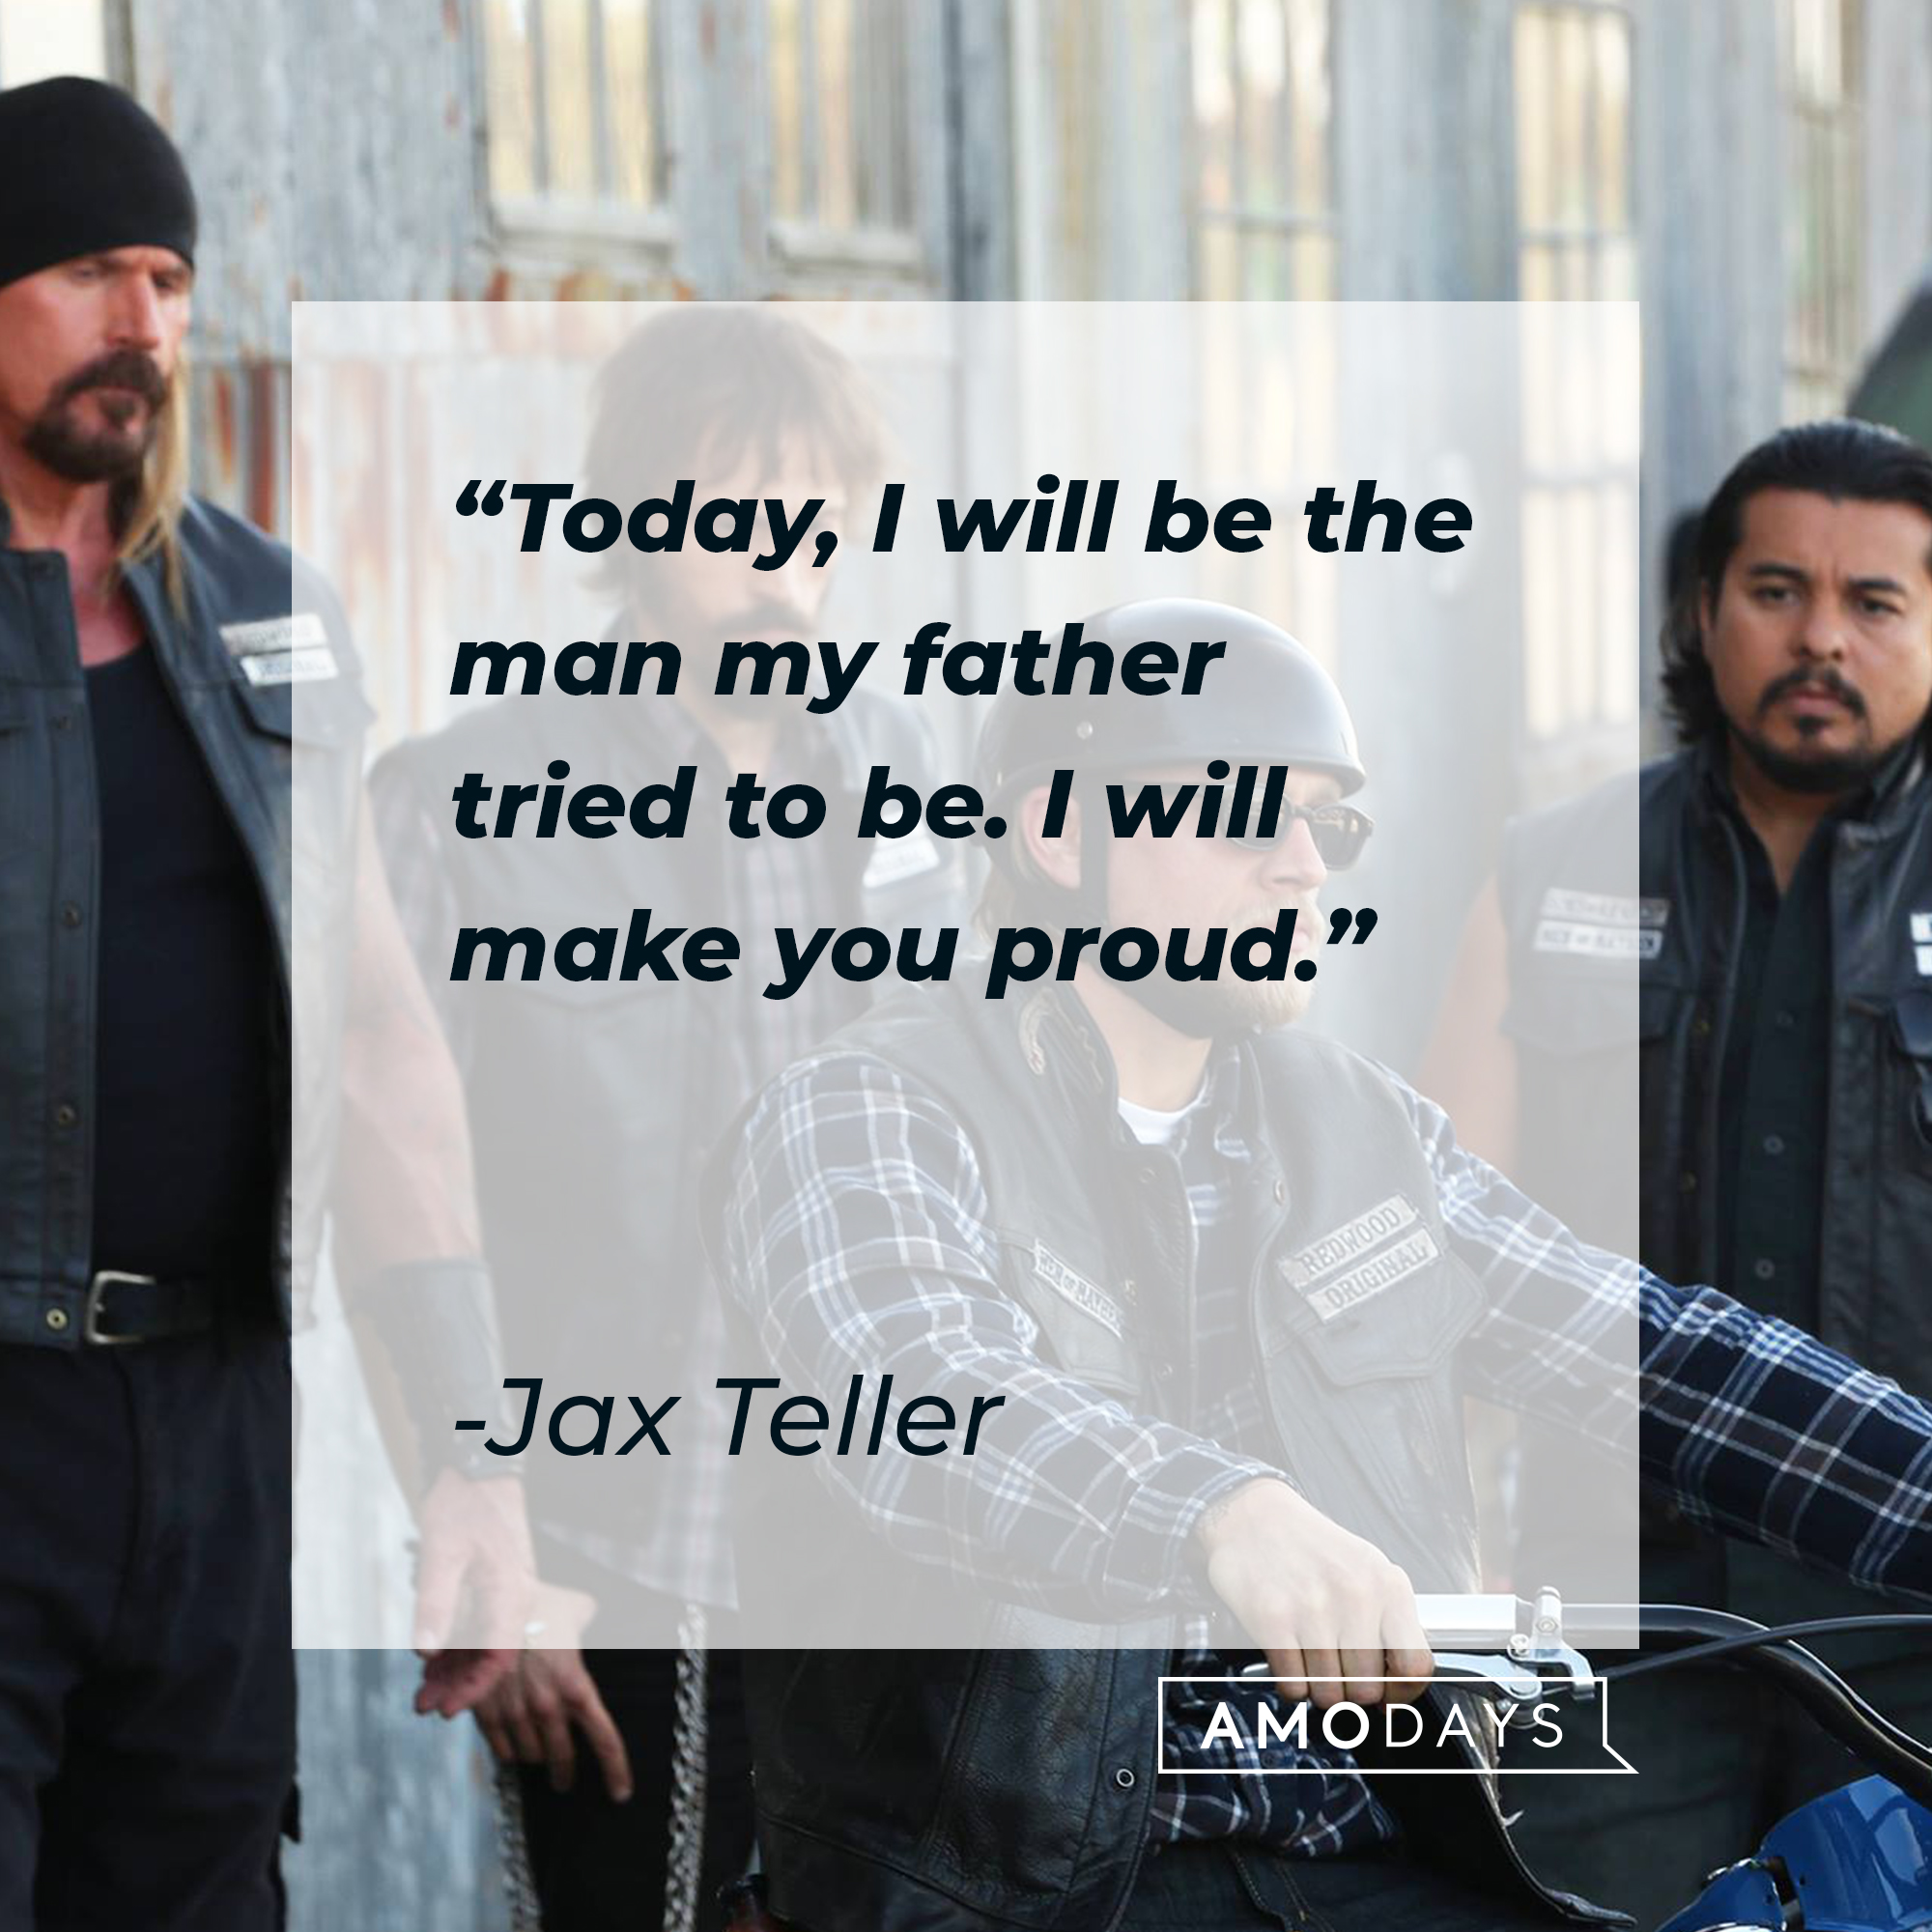 Jax Teller and other characters from ‘The Sons of Anarchy” with his quote: “Today, I will be the man my father tried to be. I will make you proud.” | Source: facebook.com/SonsofAnarchy